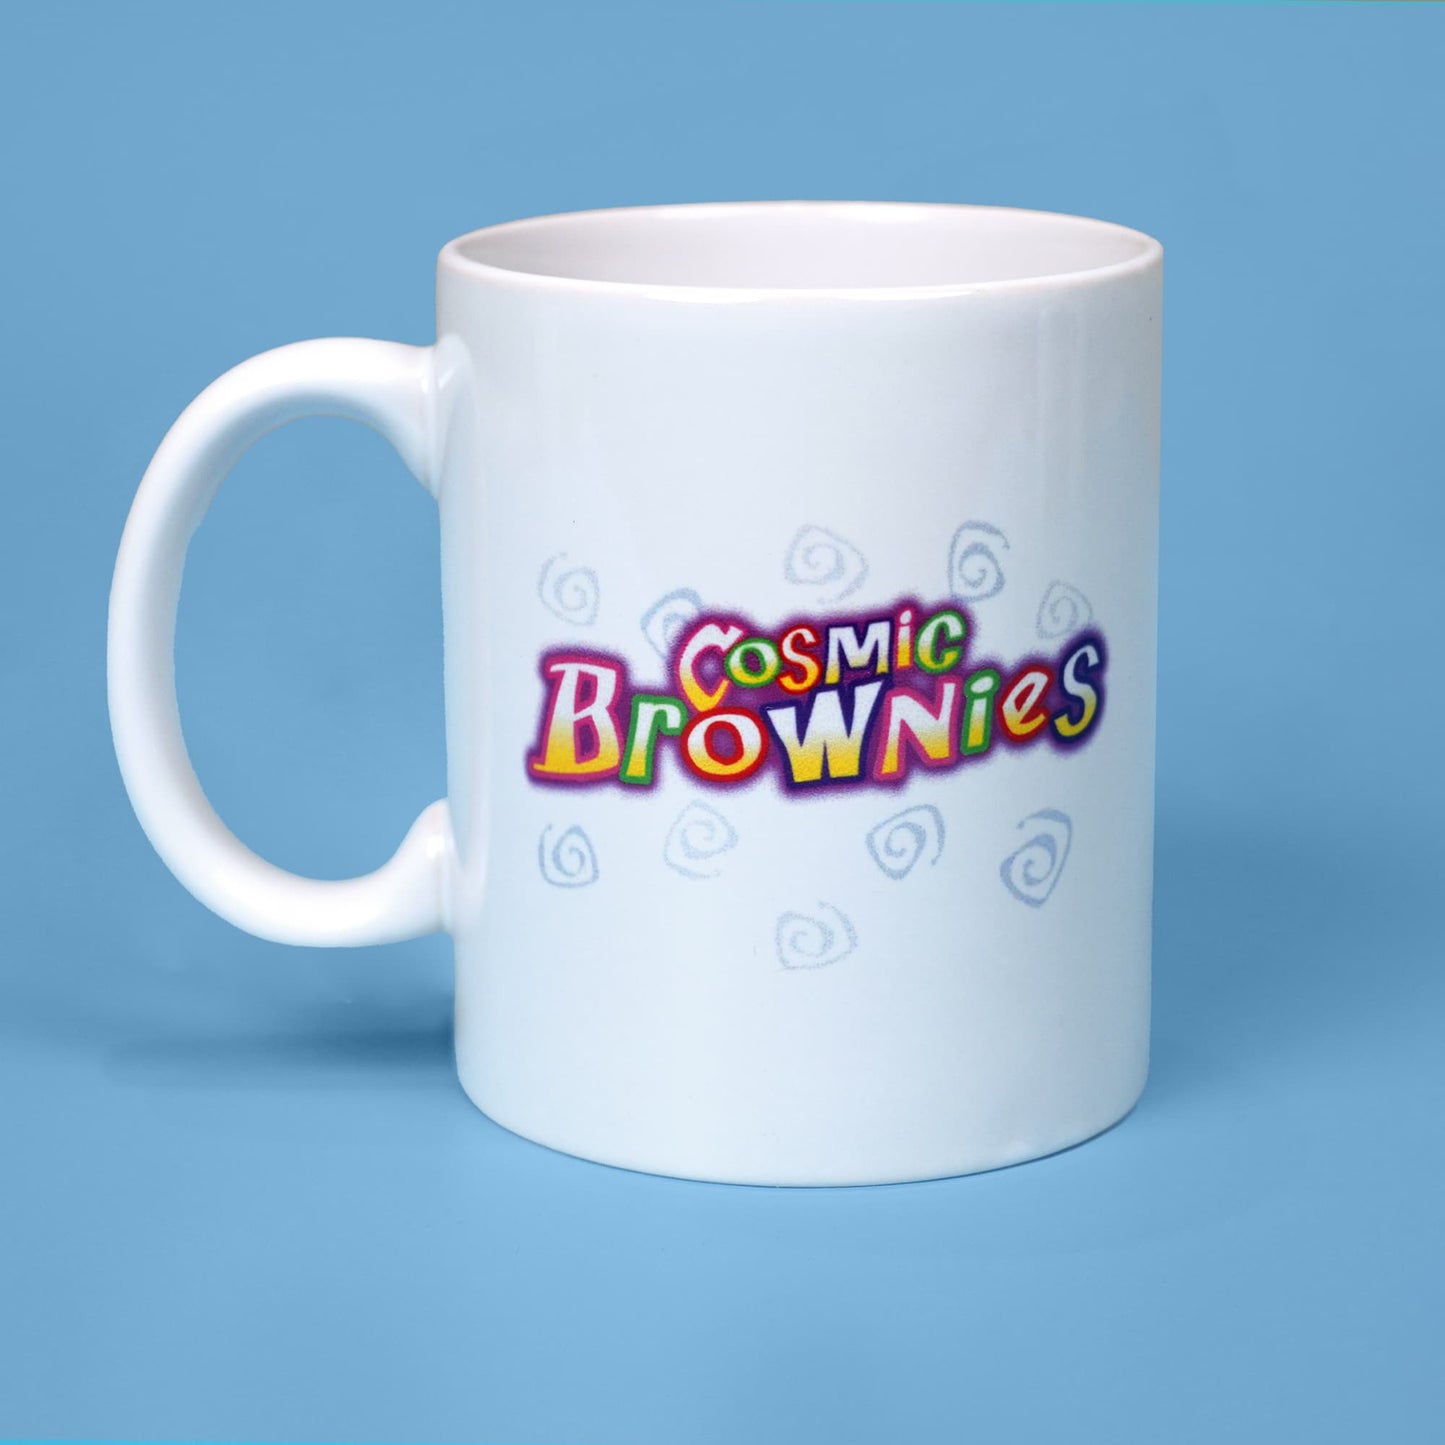 White ceramic mug with a colorful 'Cosmic Brownies' logo from Little Debbie, featuring stylized text in pink, yellow, green, and white. The design includes playful, light blue swirl patterns surrounding the logo. The mug is set against a soft blue background.